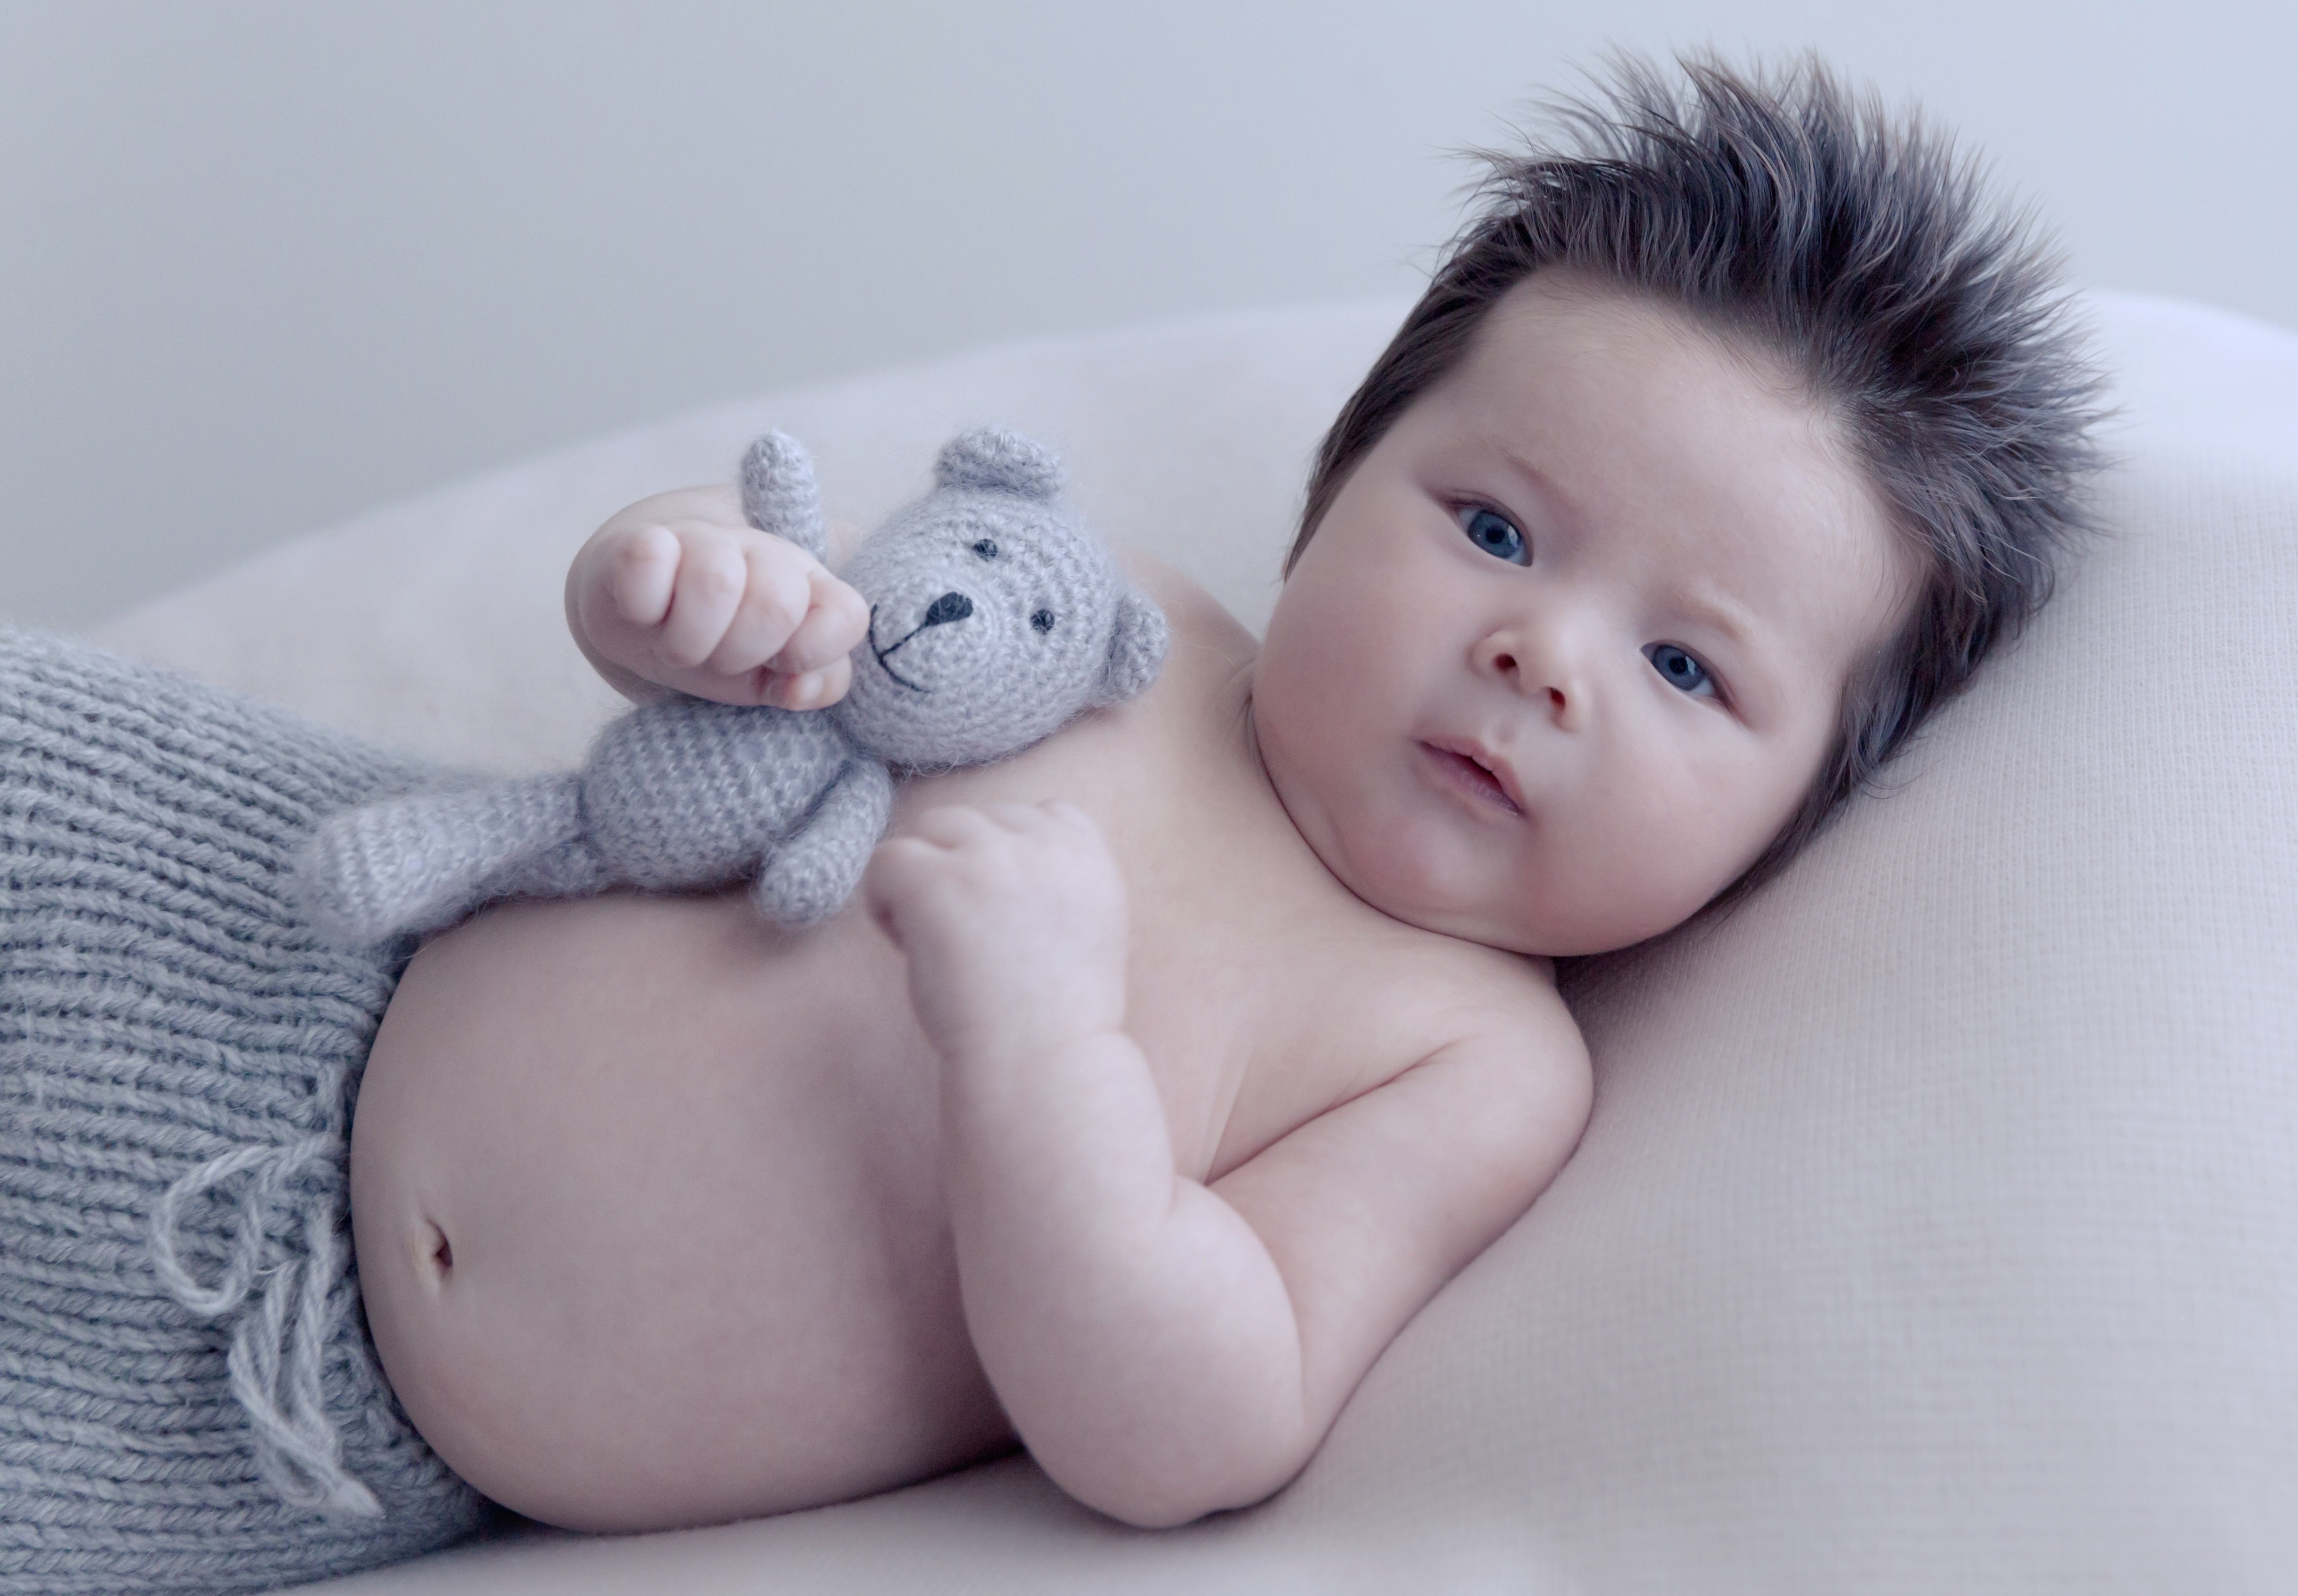 Teddy 4k Wallpapers For Your Desktop Or Mobile Screen - Cute Baby With Teddy , HD Wallpaper & Backgrounds